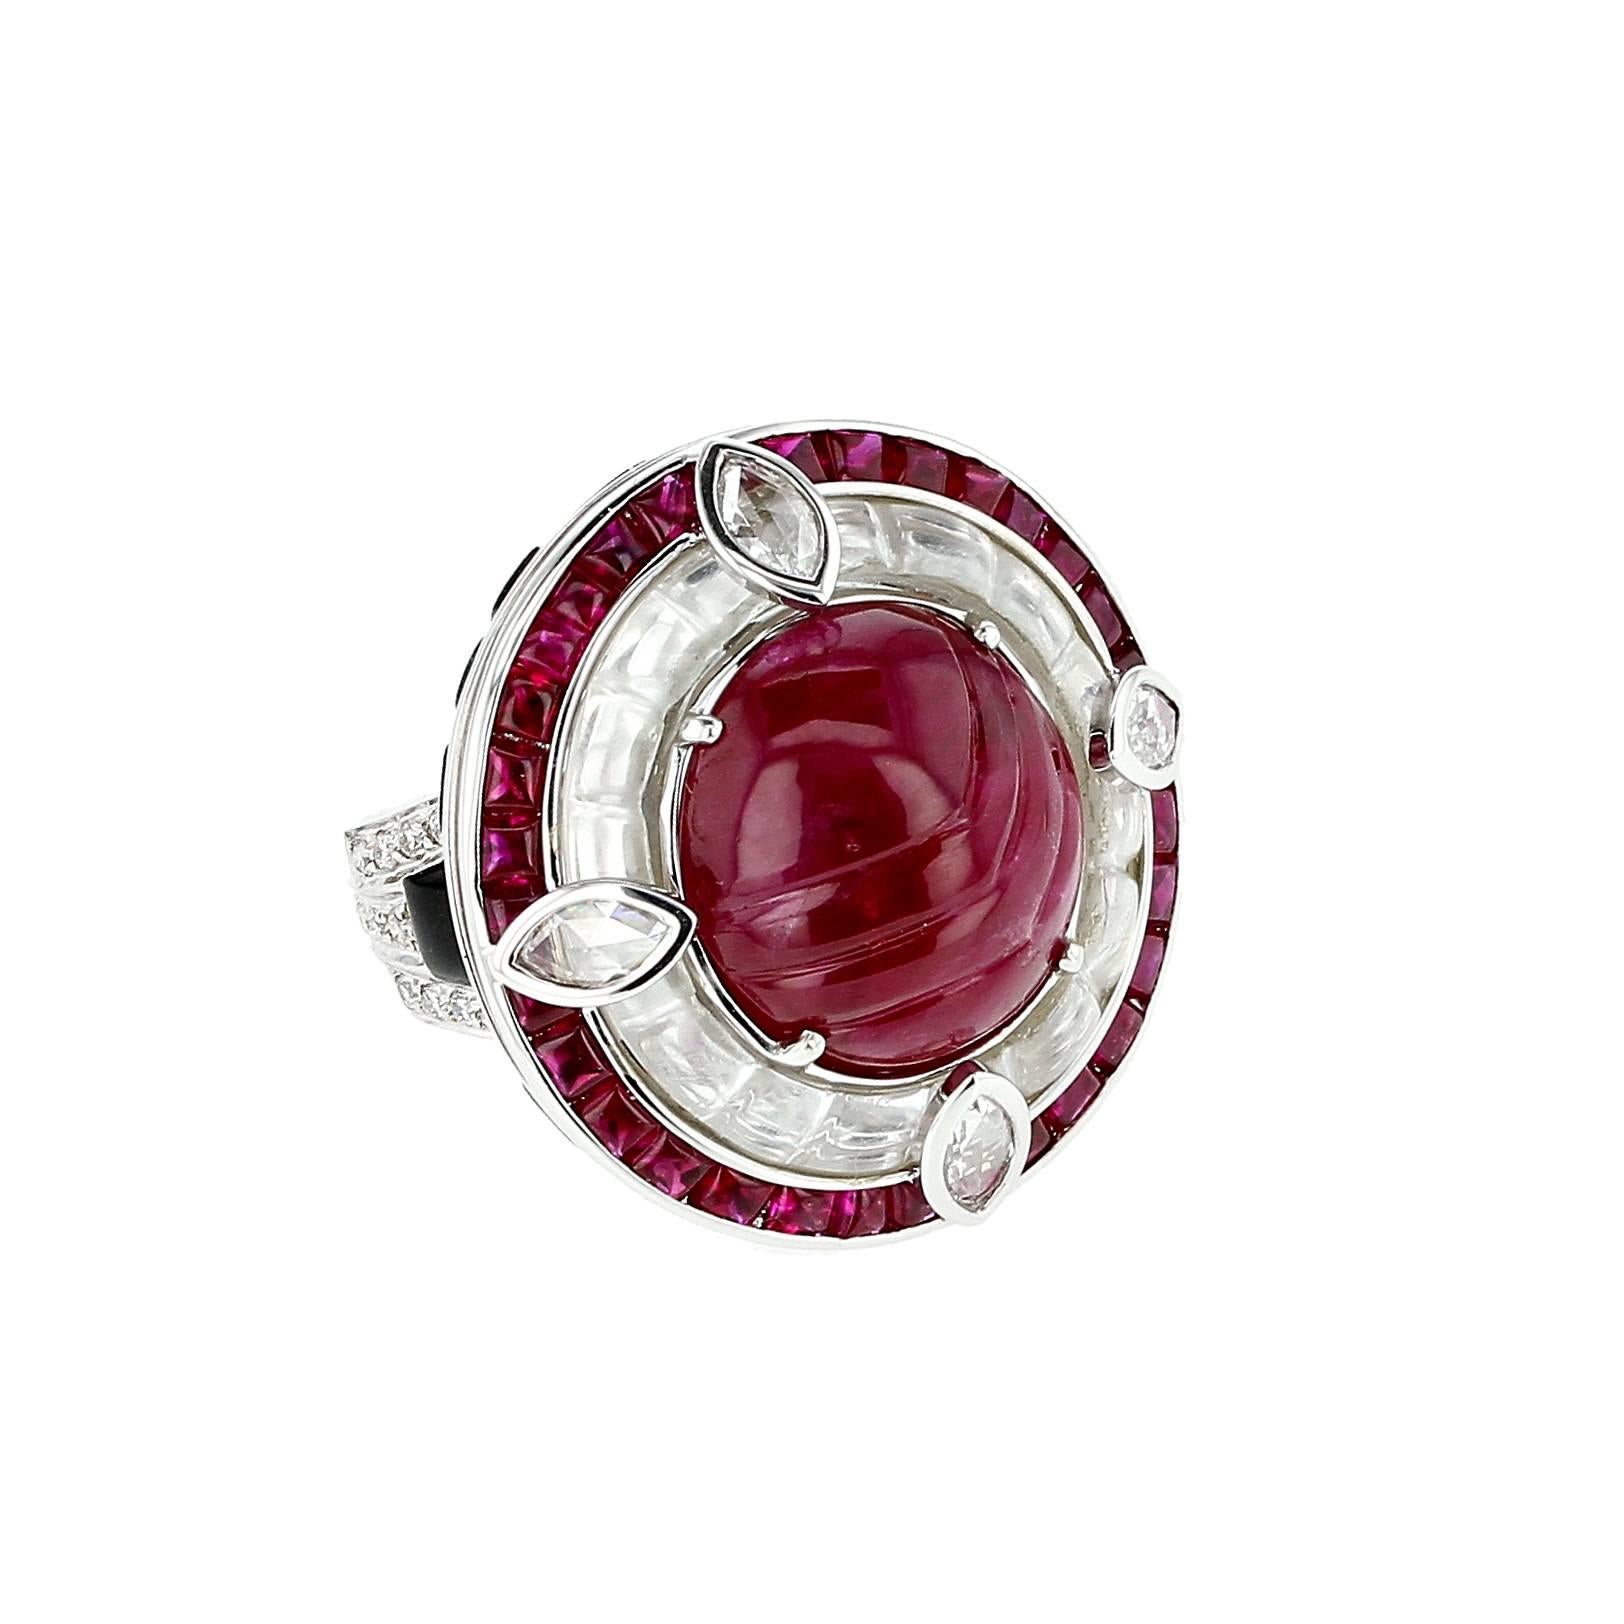 A bold and beautiful cocktail ring centered with a large near-round carved ruby weighing an estimated 17.61 carats, clustered with concentric rings of channel-set rectangular shape rock crystal and princess cut rubies, flanked by tapered geometric